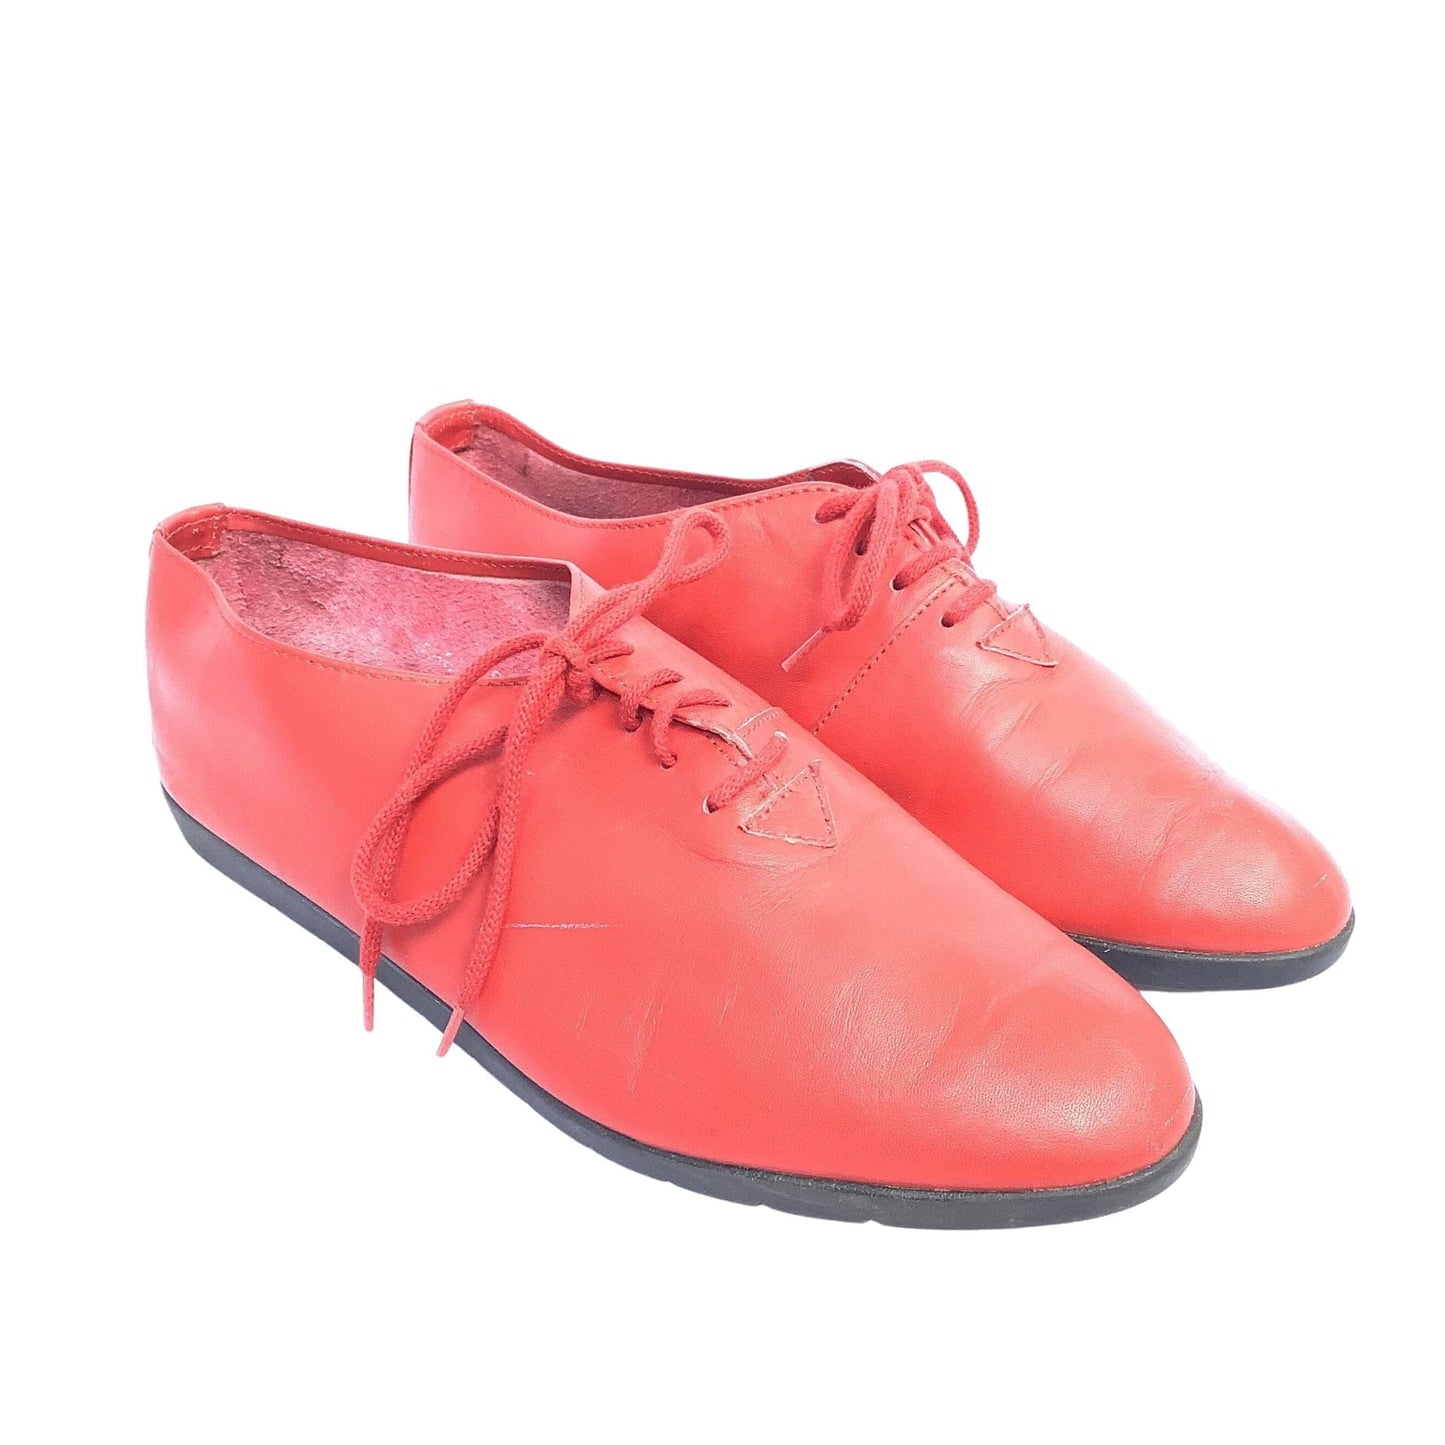 1980s Flat Red Oxfords 7.5 / Red / Vintage 1980s